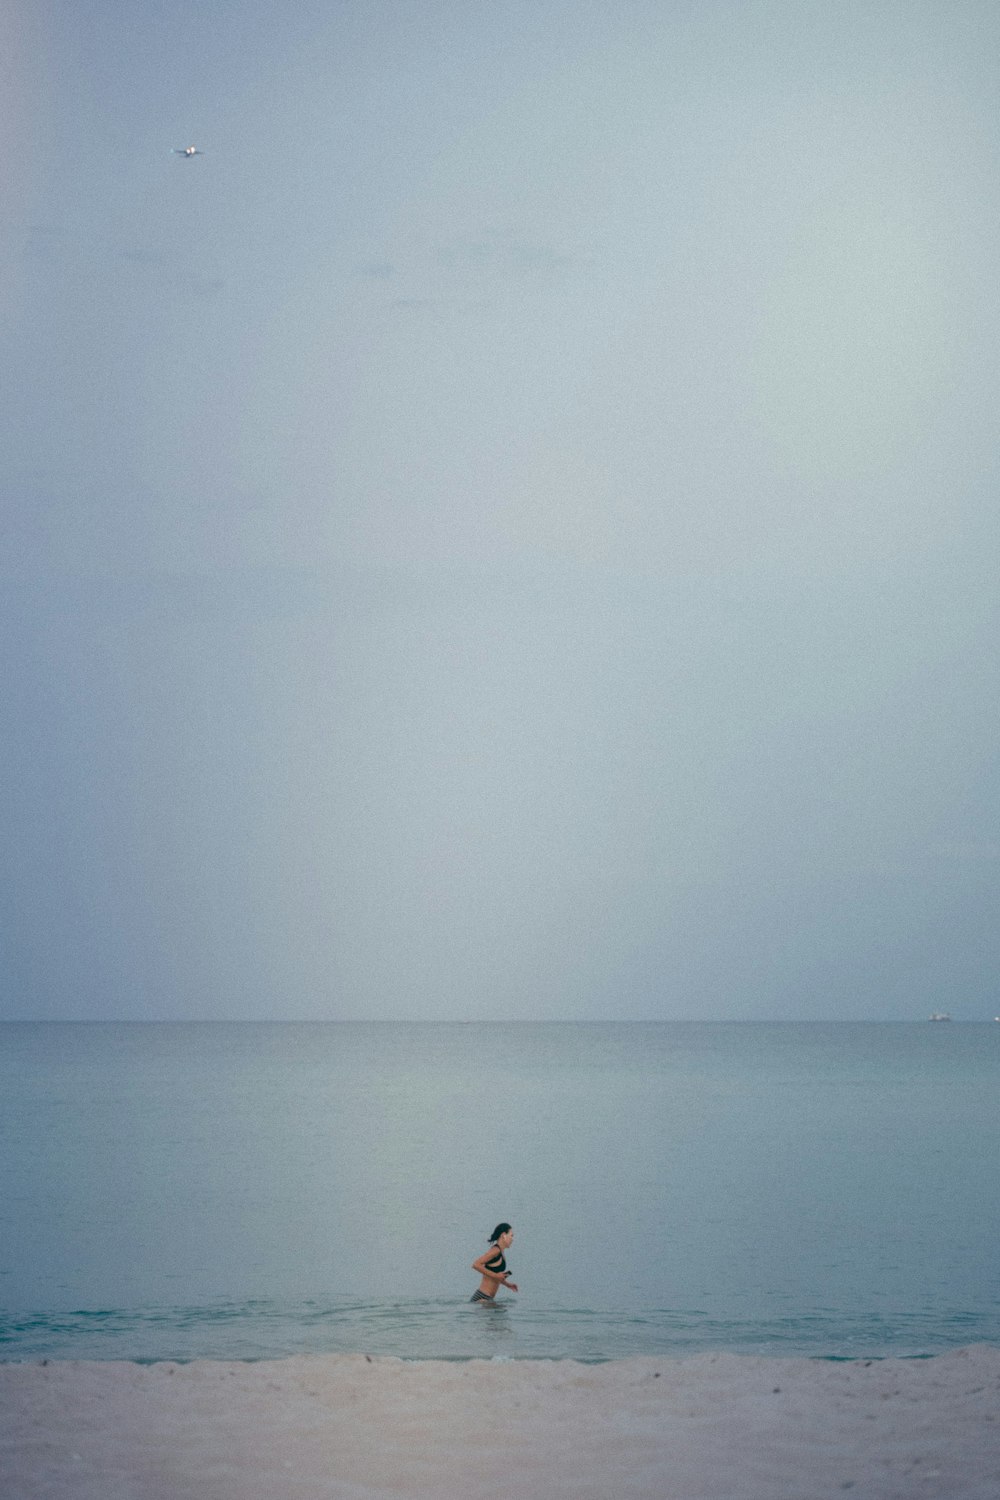 a person wading in the ocean on a cloudy day